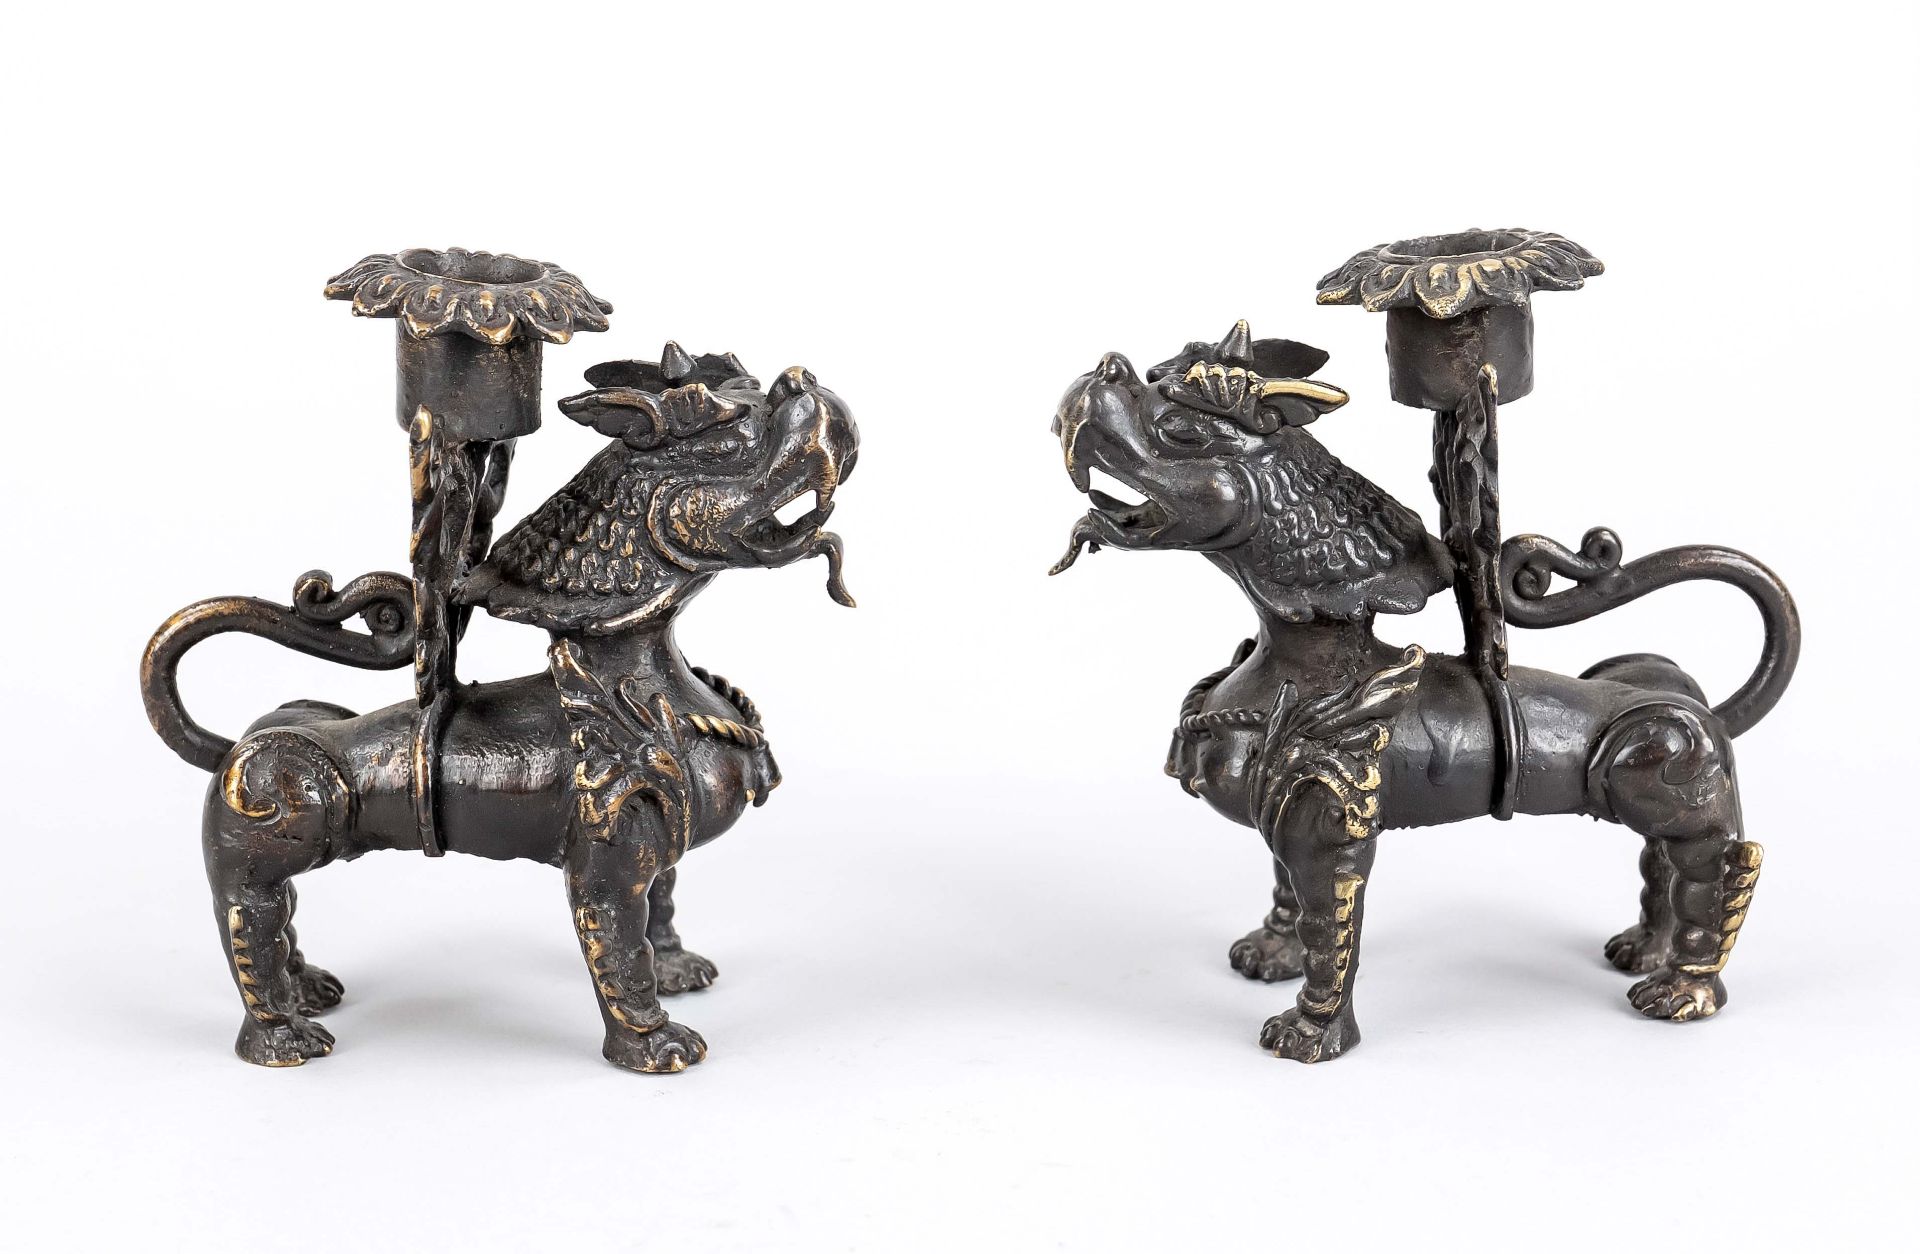 Pair of lion candlesticks, Nepal, 20th c., brass casting of two temple lions in Nepalese style